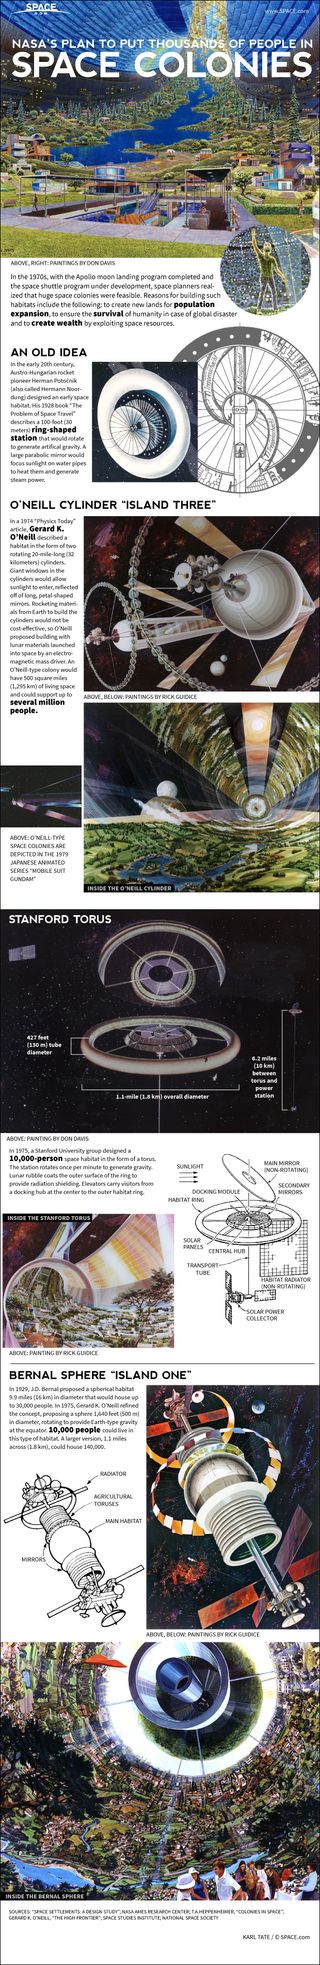 Infographic: NASA's 1970s plans for building giant space colonies.